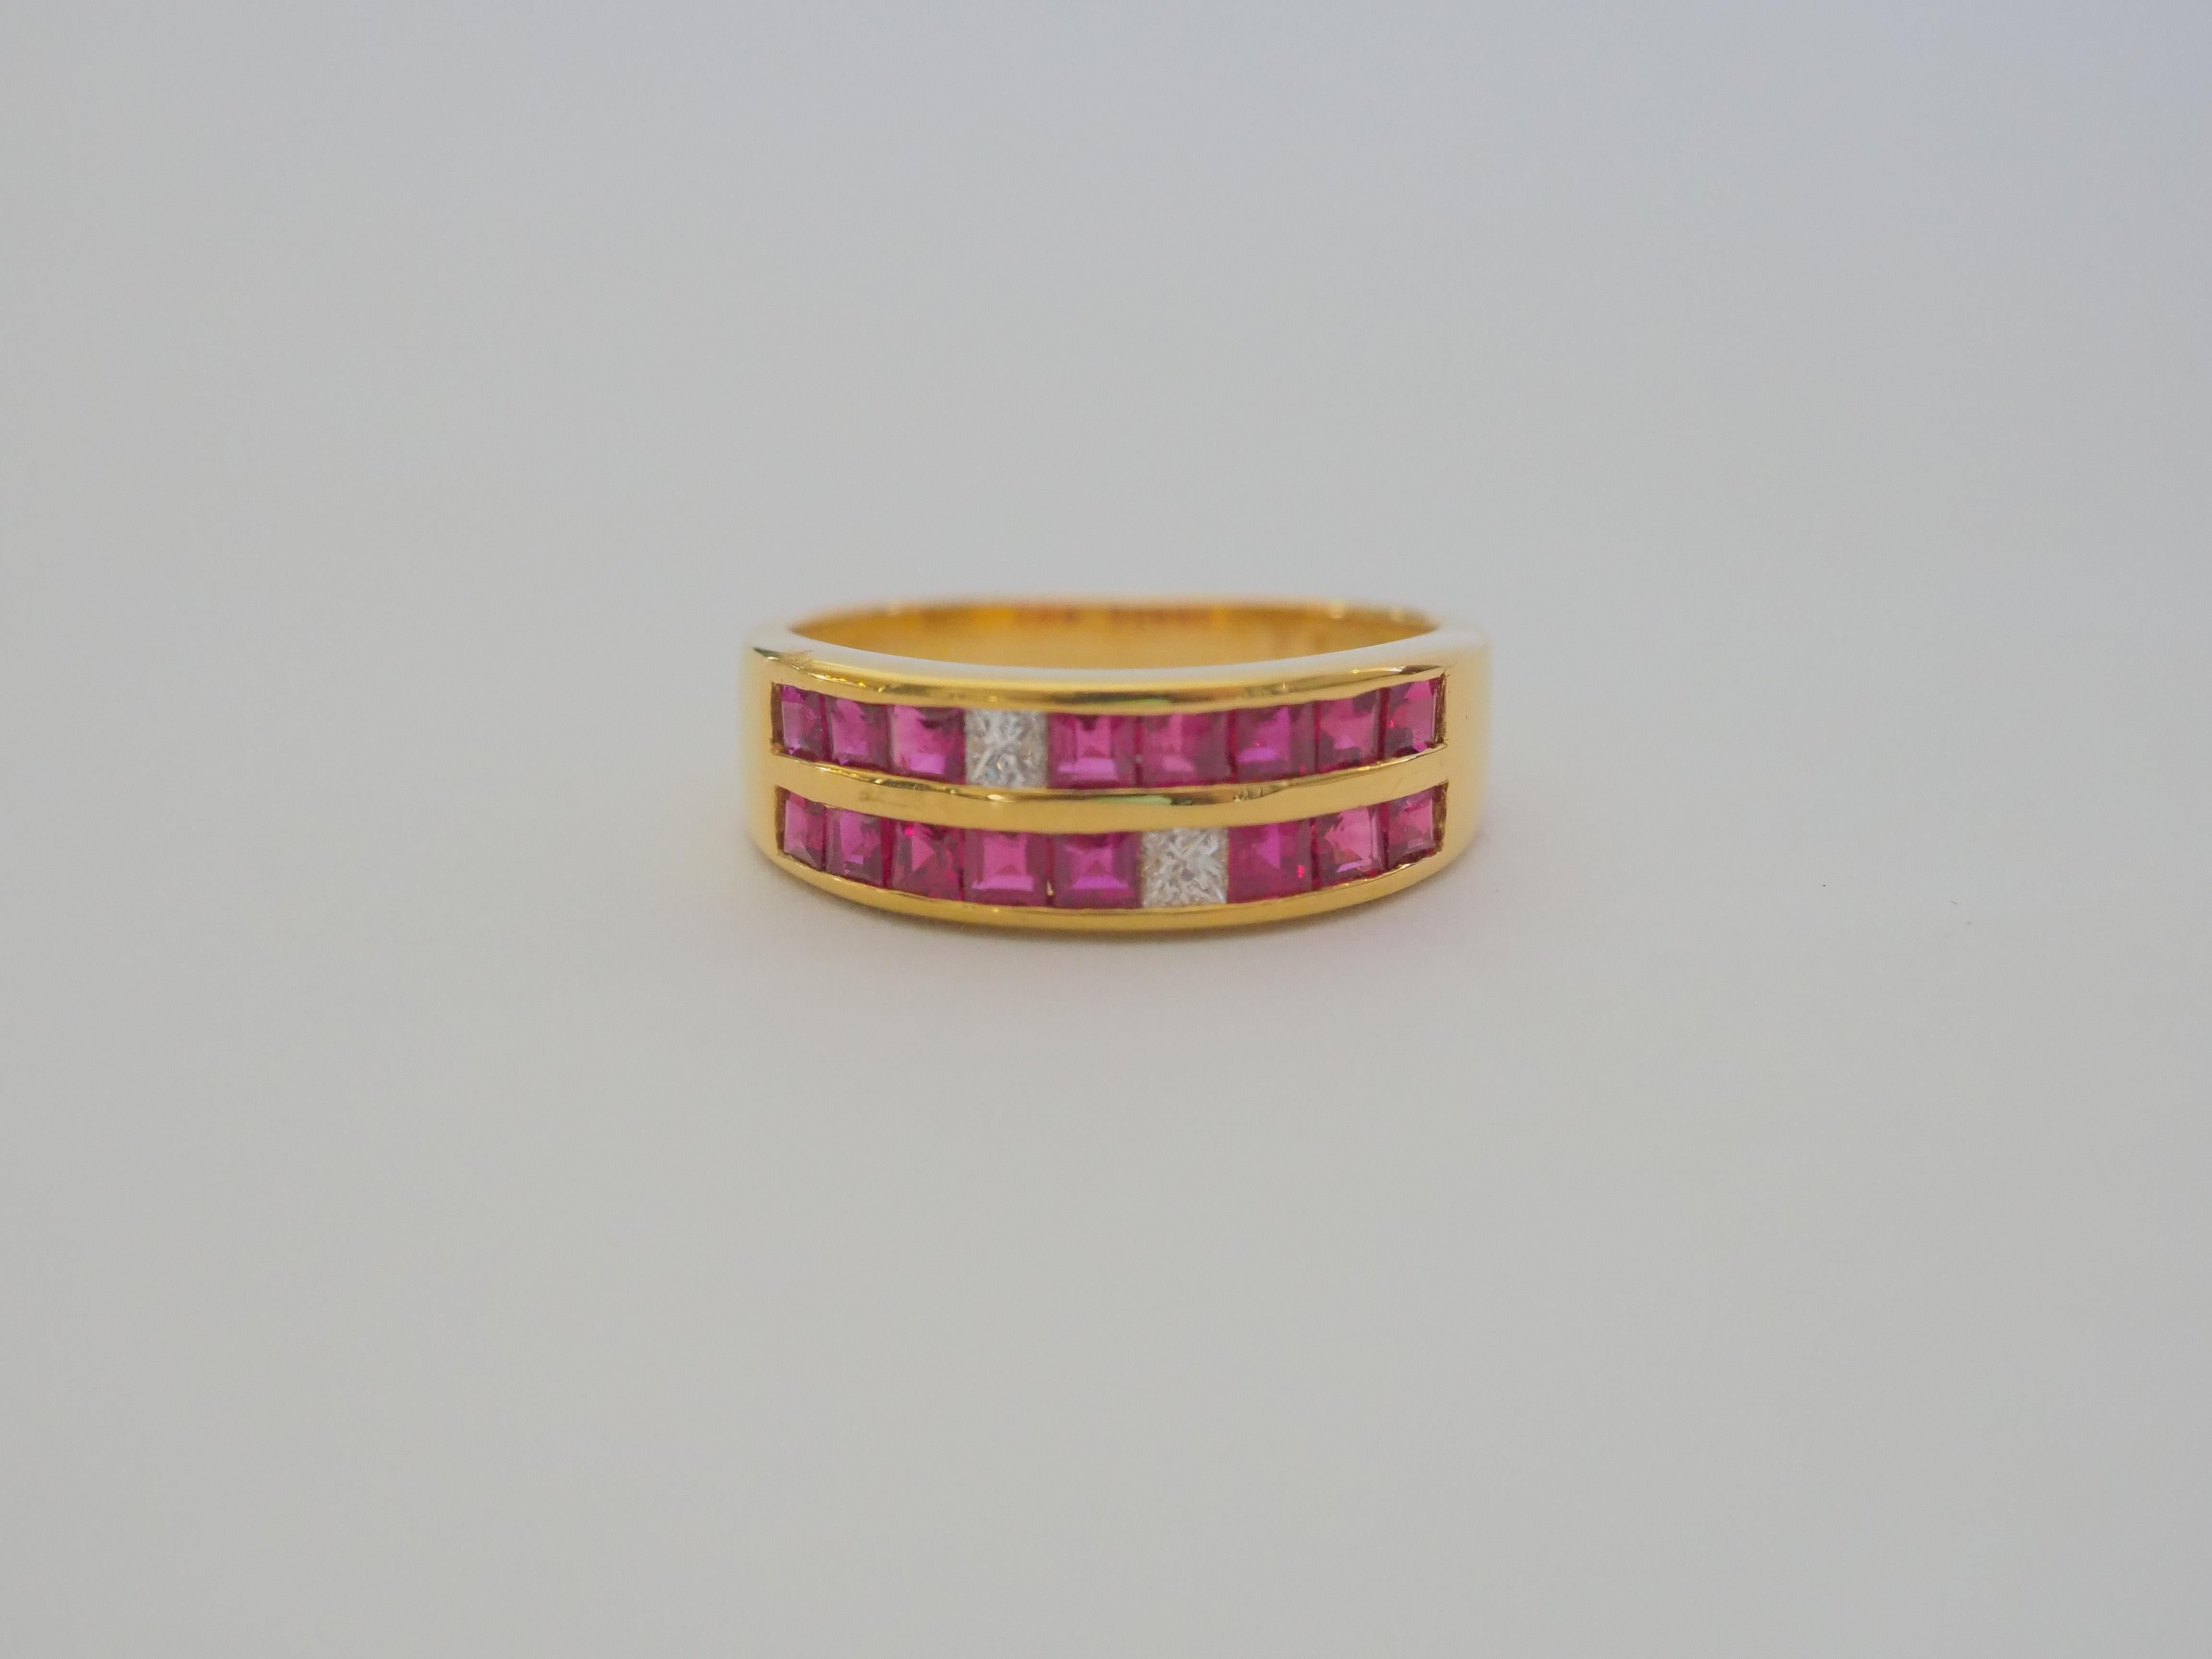 A gorgeous luxury Neo-vintage chunky band ring that is both suitable for all sexes. This ring has two rows of beautiful Thai rubies and princess diamonds channeled nicely into the band. The square cut rubies have a beautiful pinkish red hue and the